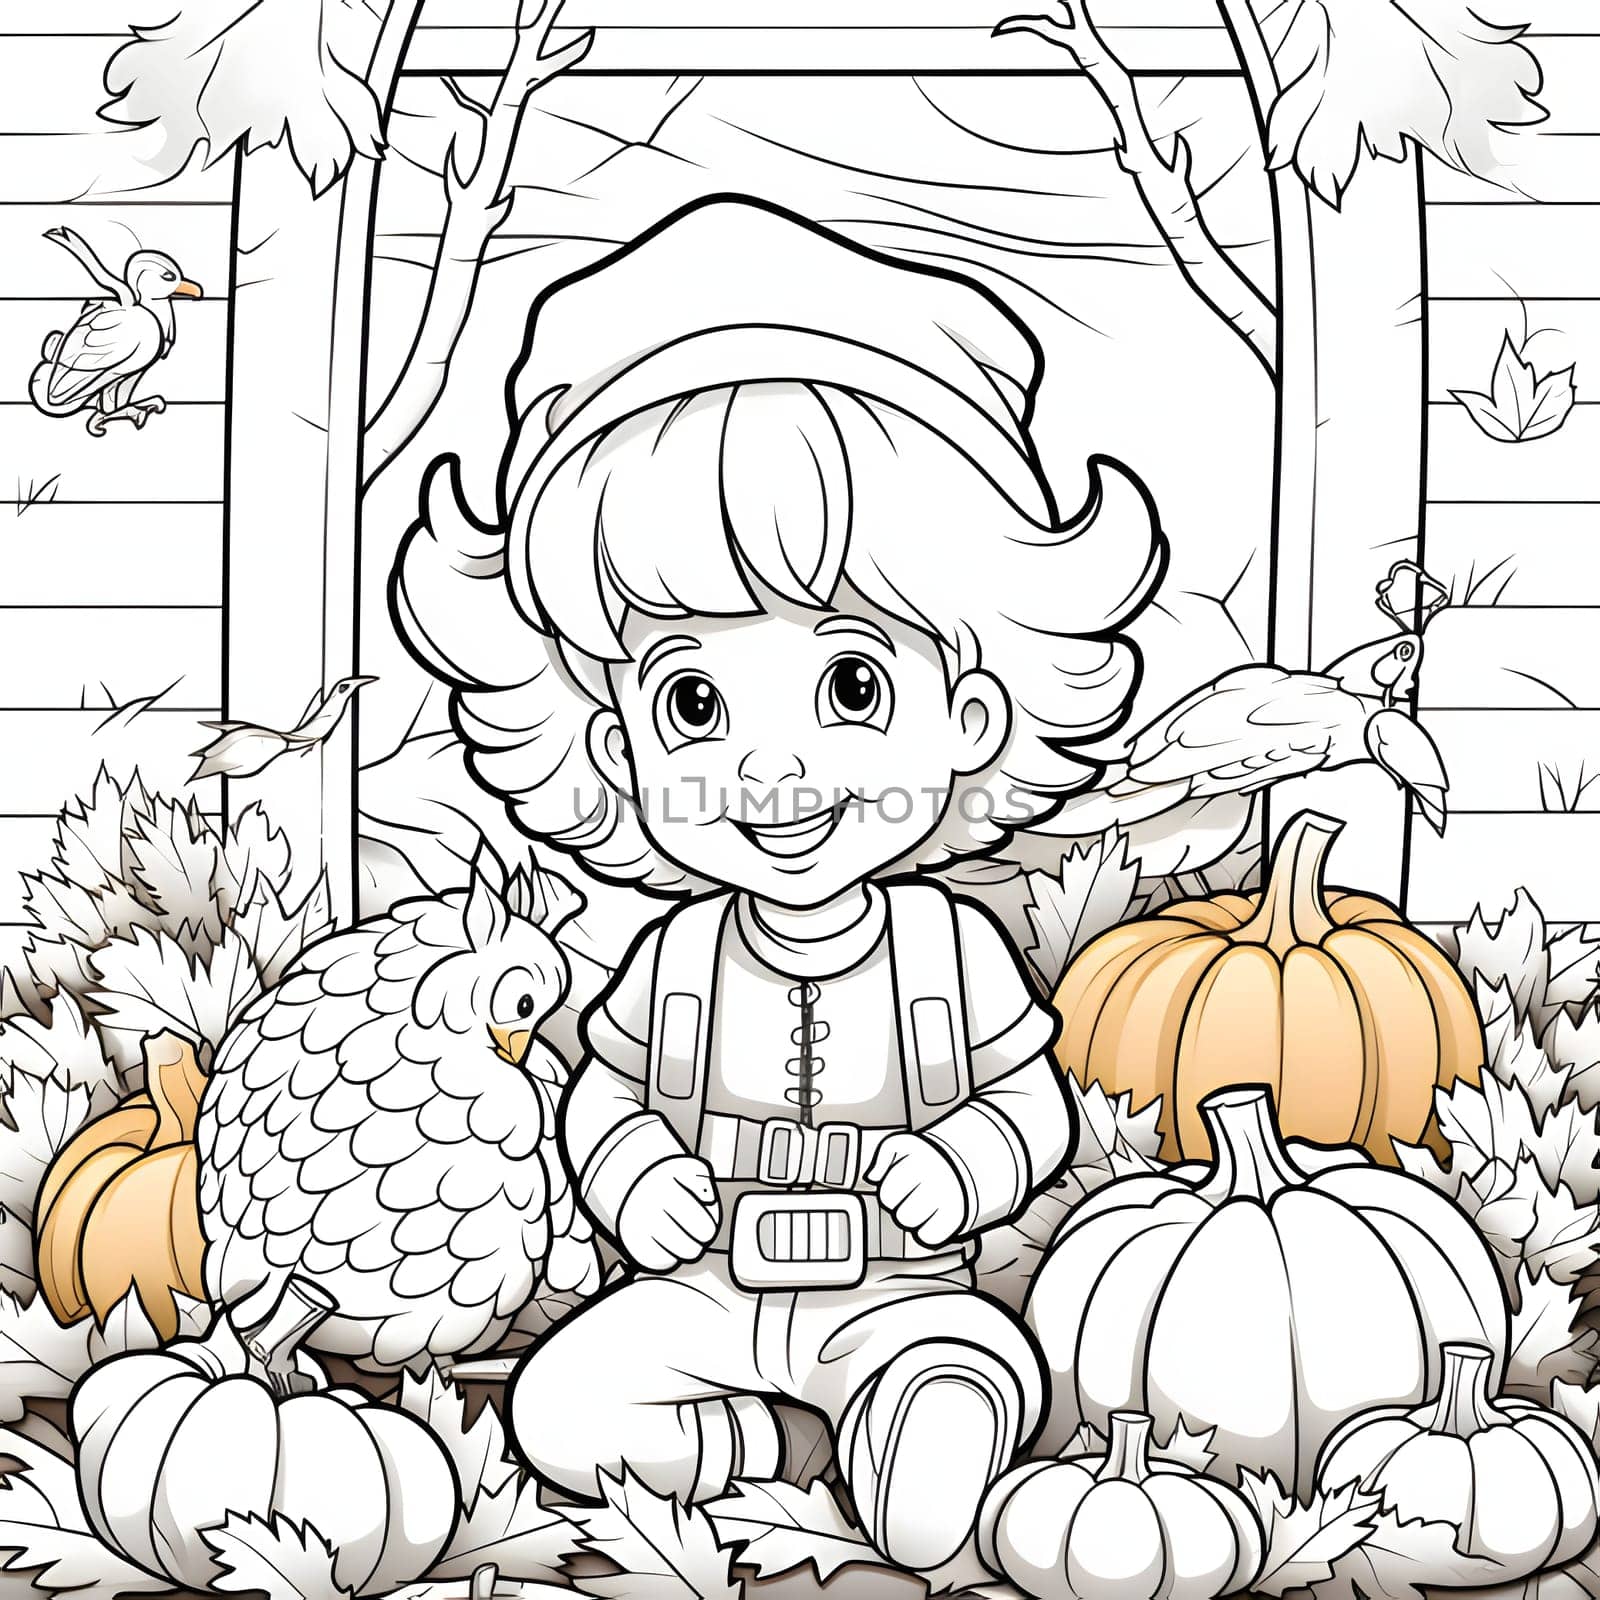 Black and White coloring sheet smiling boy with pumpkins and turkey. Pumpkin as a dish of thanksgiving for the harvest, picture on a white isolated background. by ThemesS